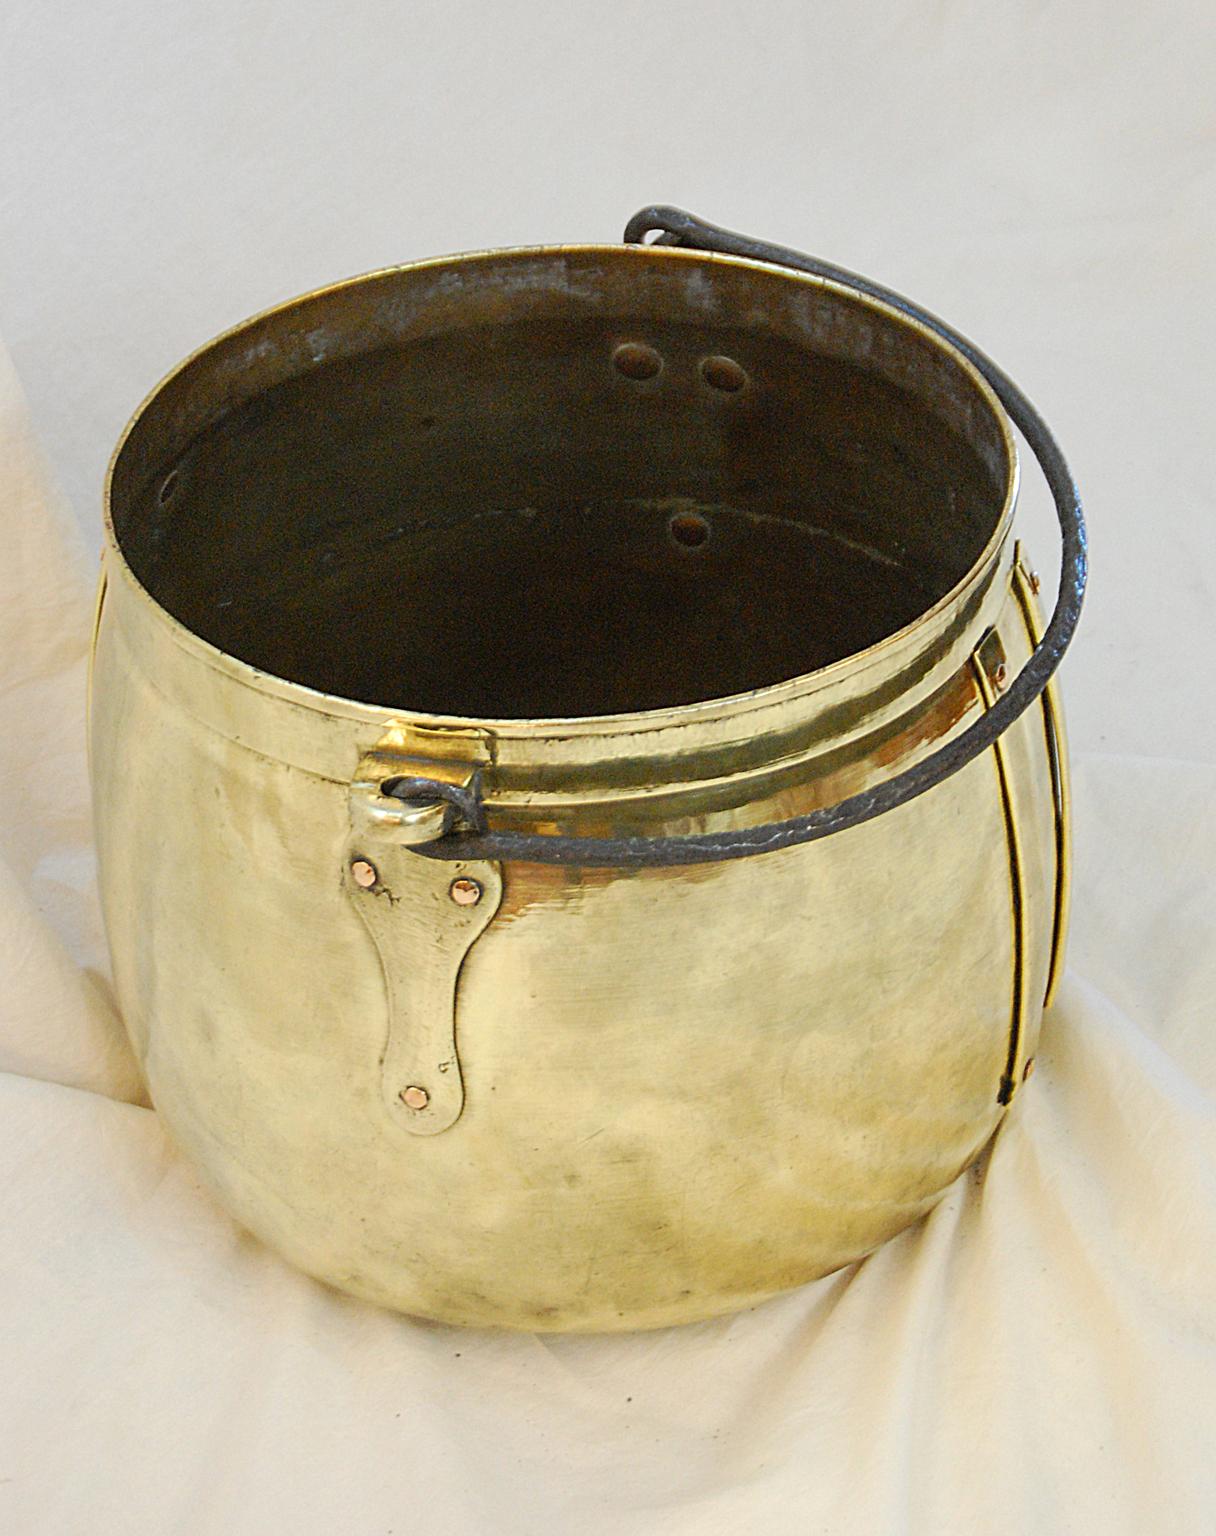 English 19th century Arts & Crafts period brass 15 1/2 inch cauldron with iron swing handle. This exceptionally heavy quality brass cauldron exemplifies the Arts & Crafts period with enhanced decorative extensions to the bold handle carriers and